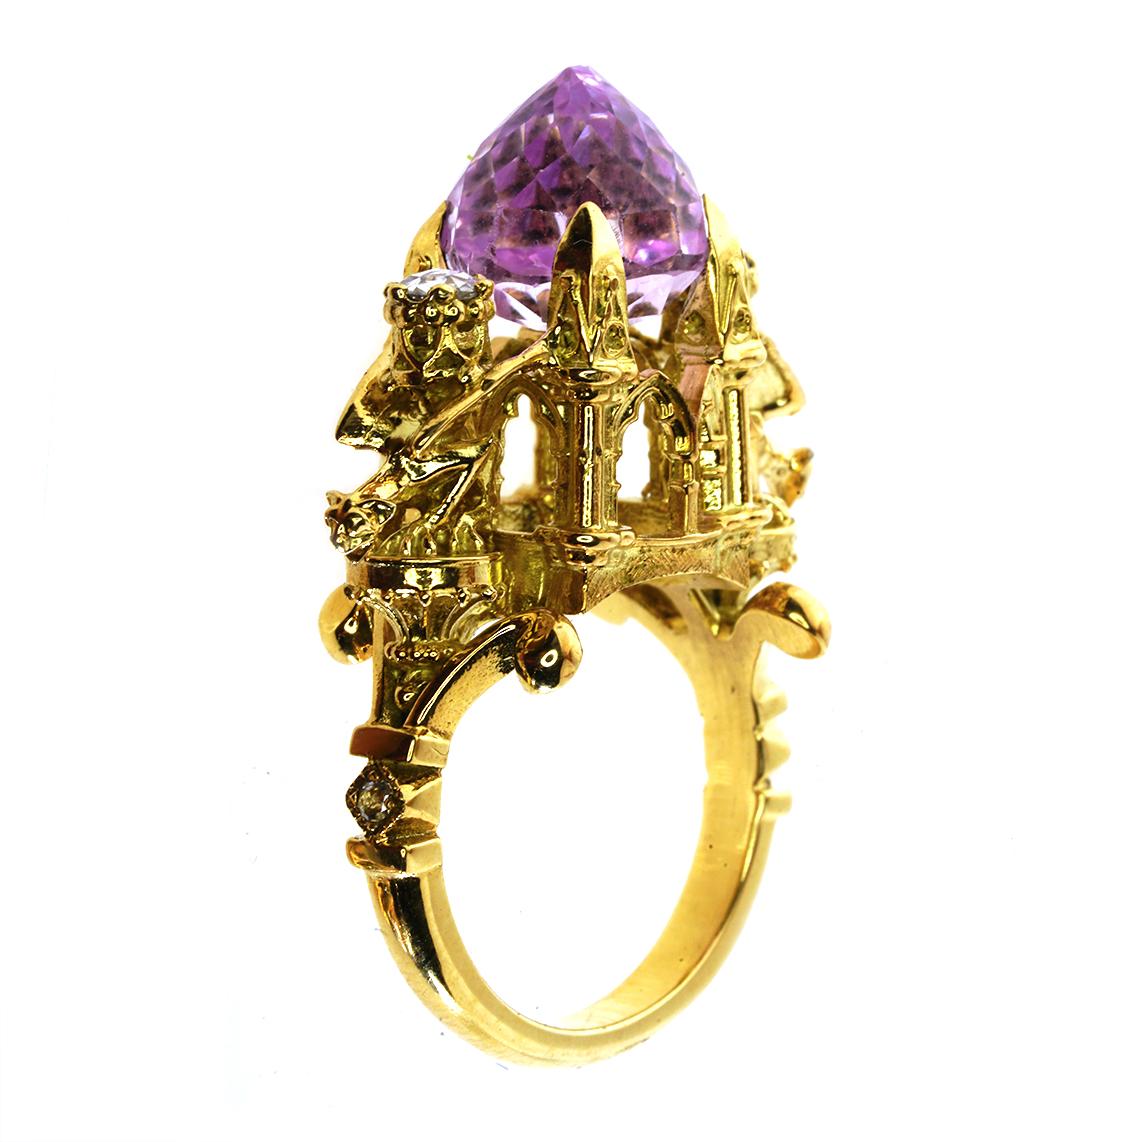 The Higher Divinity Ring is an exquisite piece. This incandescent ring is a one of a kind, luxurious masterpiece suitable for all divine entities

Handmade in 18kt yellow gold this incredible ring features a central, oval cut kunzite, claw set